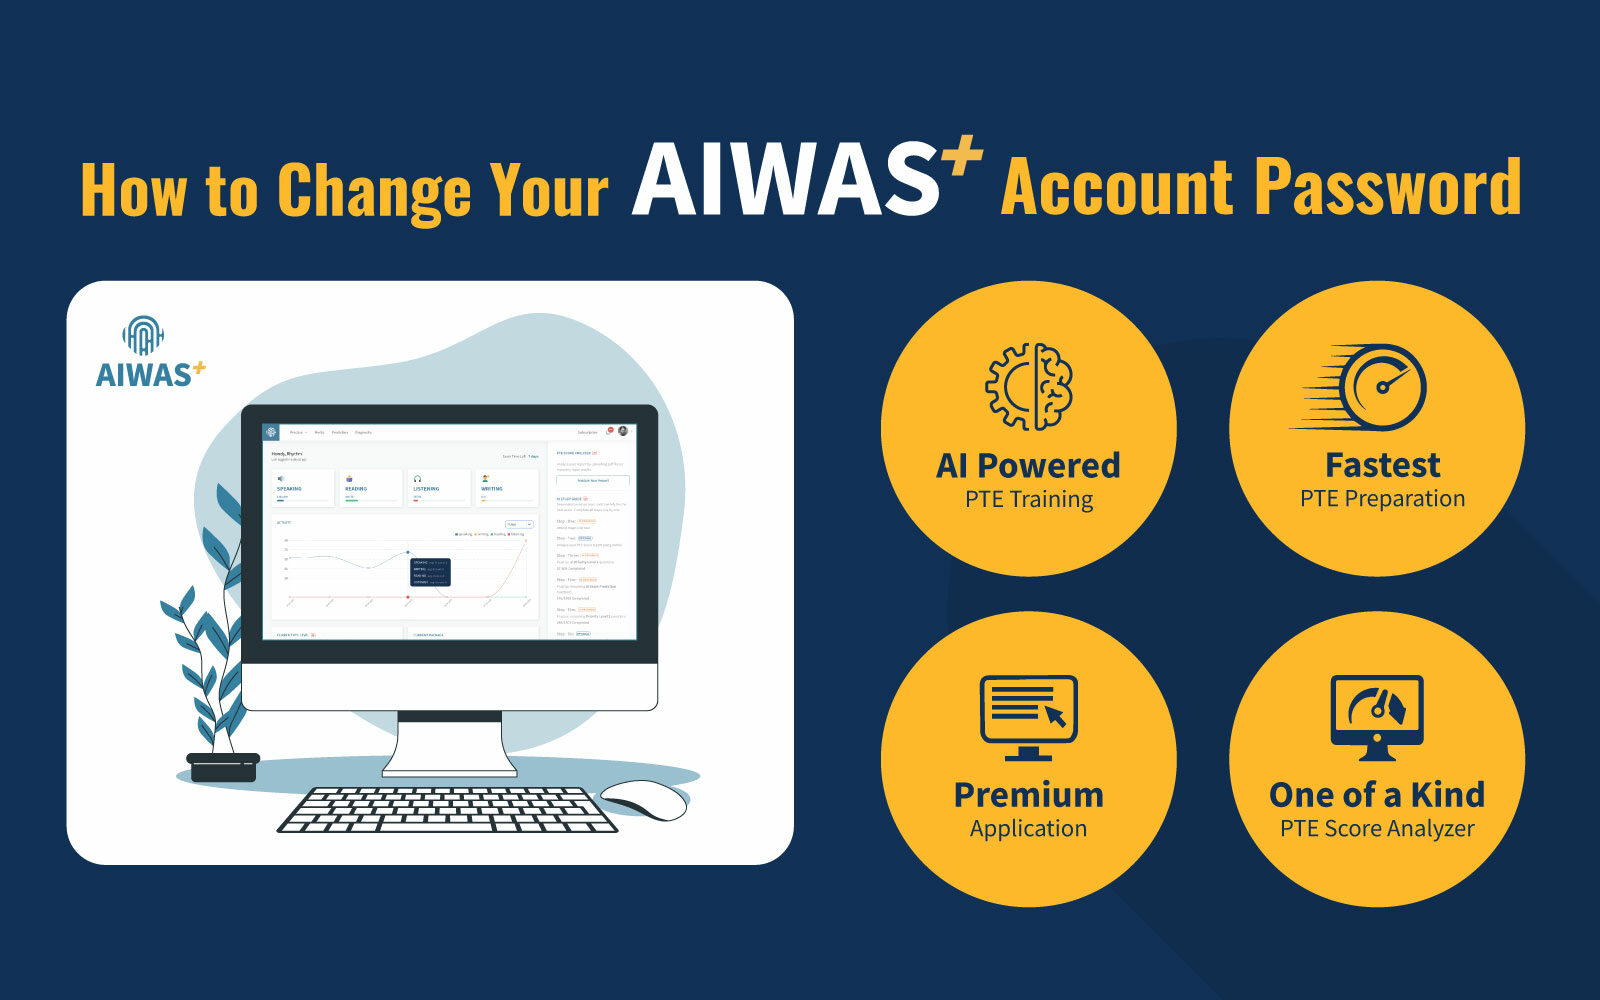 How to Change Your AIWAS Plus Account Password?